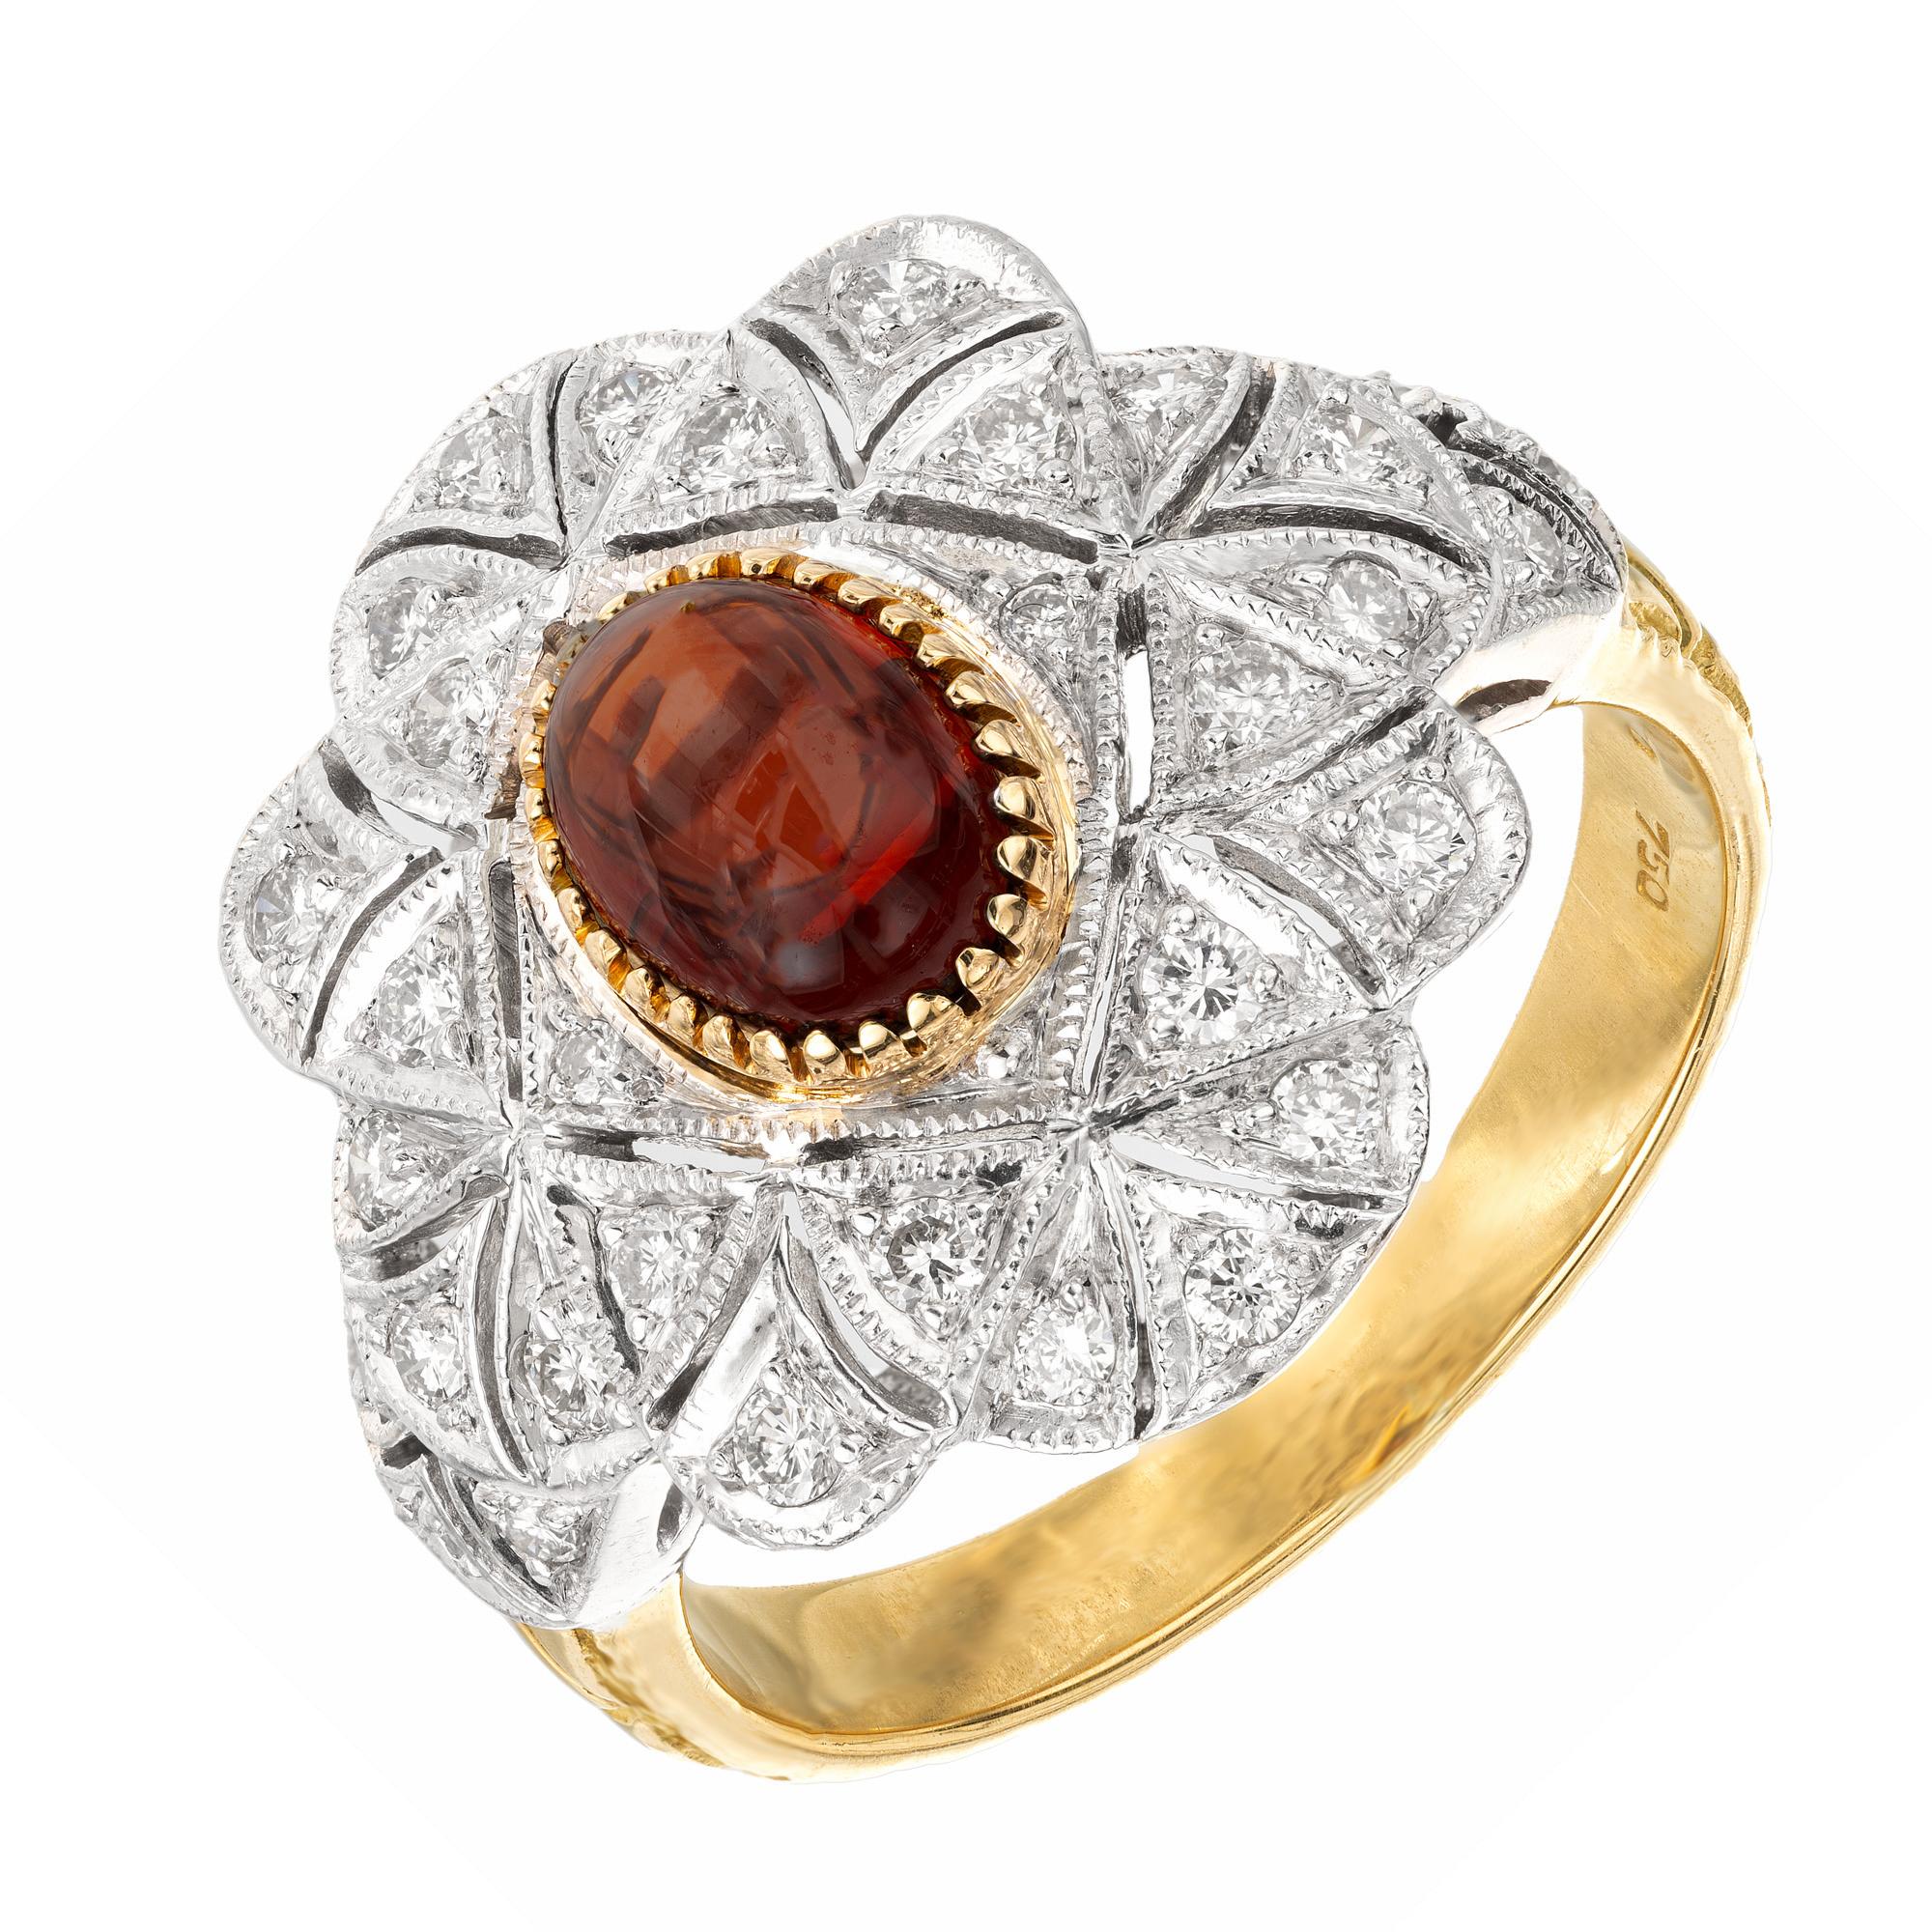 Victorian style garnet and diamond cluster ring. Orange and red cabochon oval 1.00ct garnet is the center of this captivating cluster ring. Accented b y 30 round cut diamonds in a cluster style set in a platinum crown. The shank is 18k yellow gold